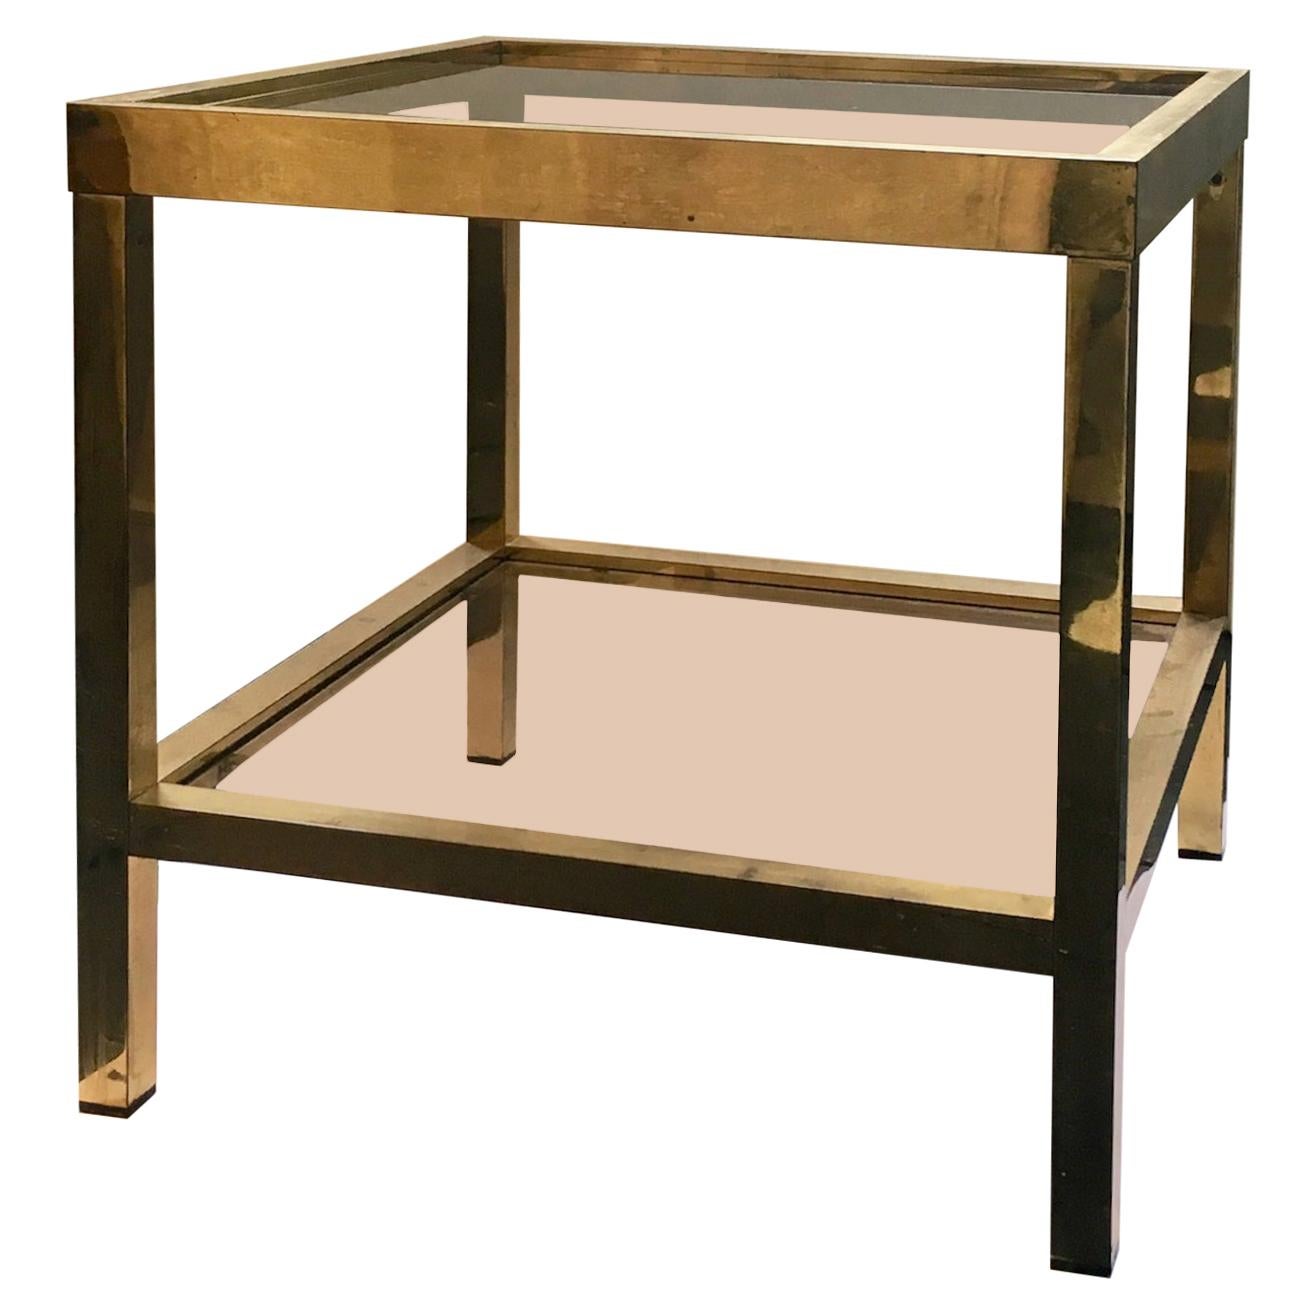 Square Two-Tier Brass Side Table with Tinted Glass Shelves, European, 1970s